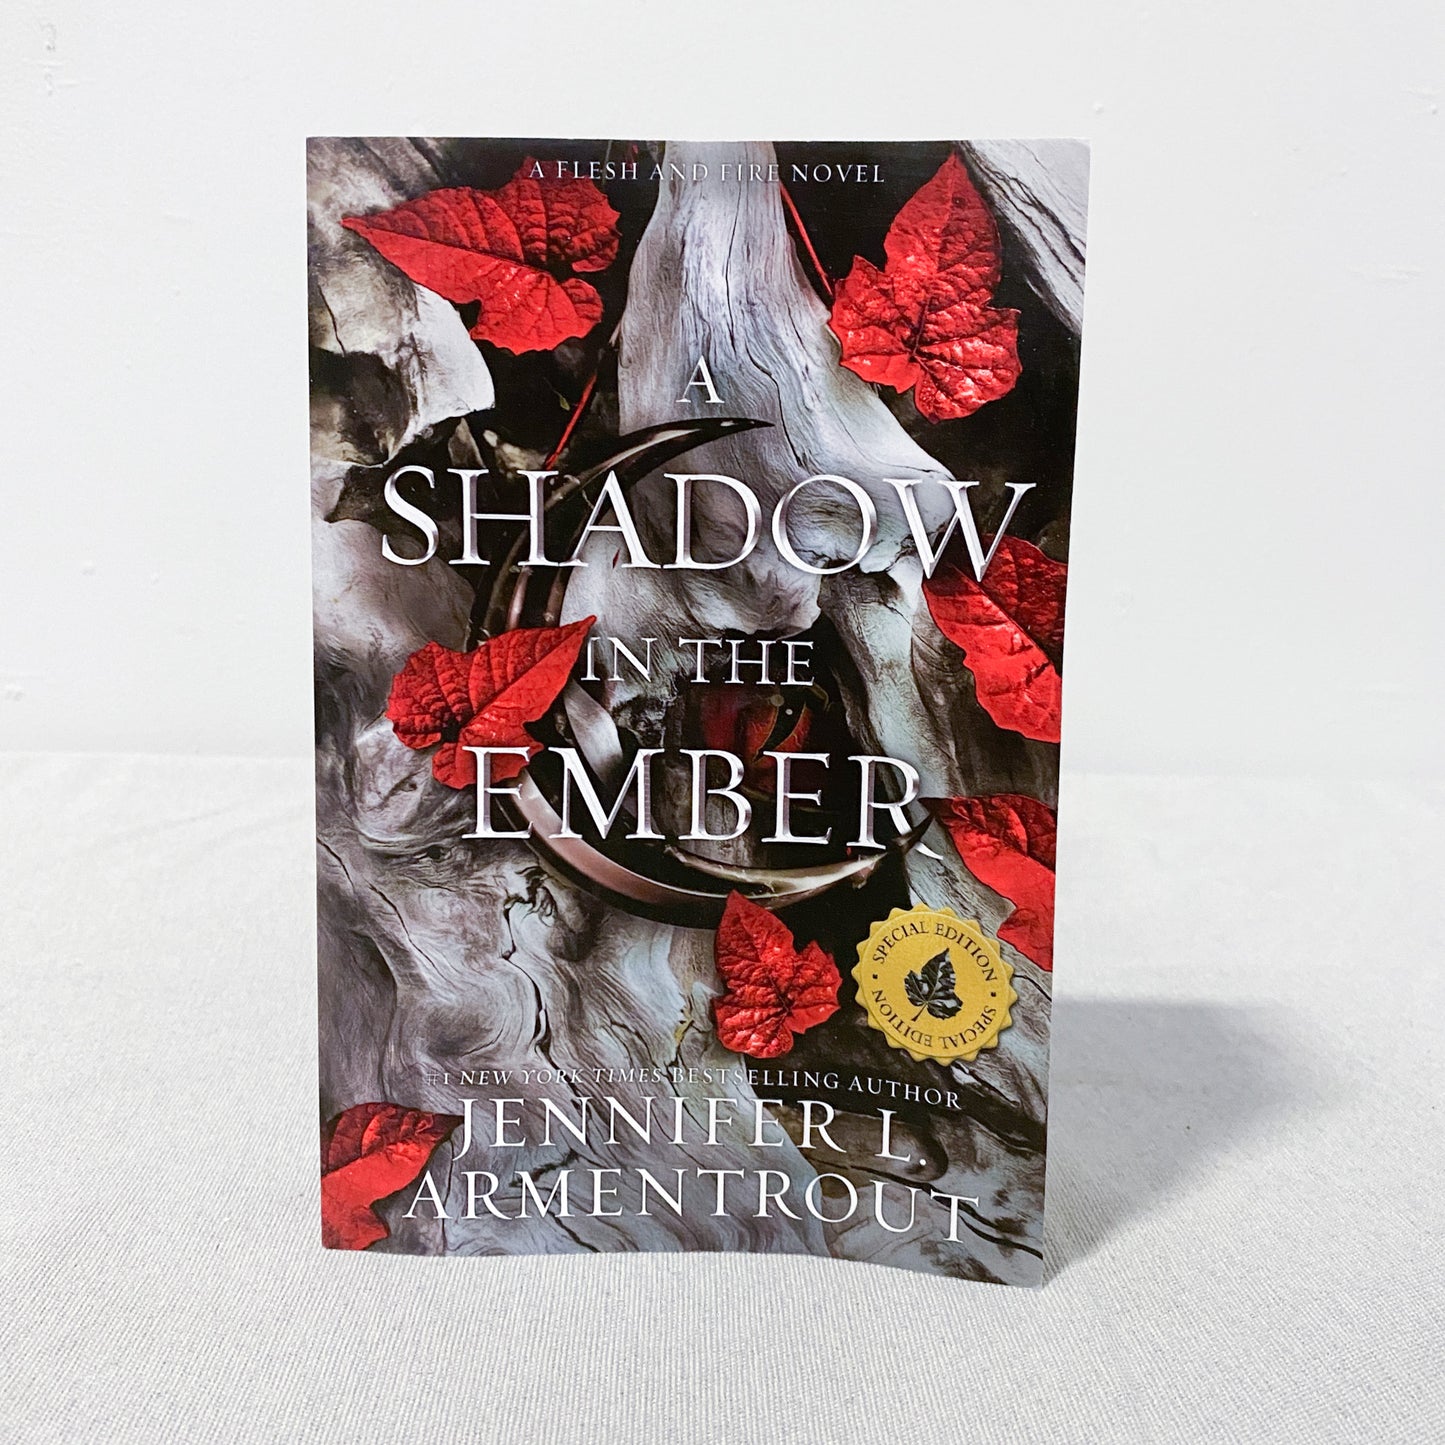 'A Shadow In The Ember' Novel